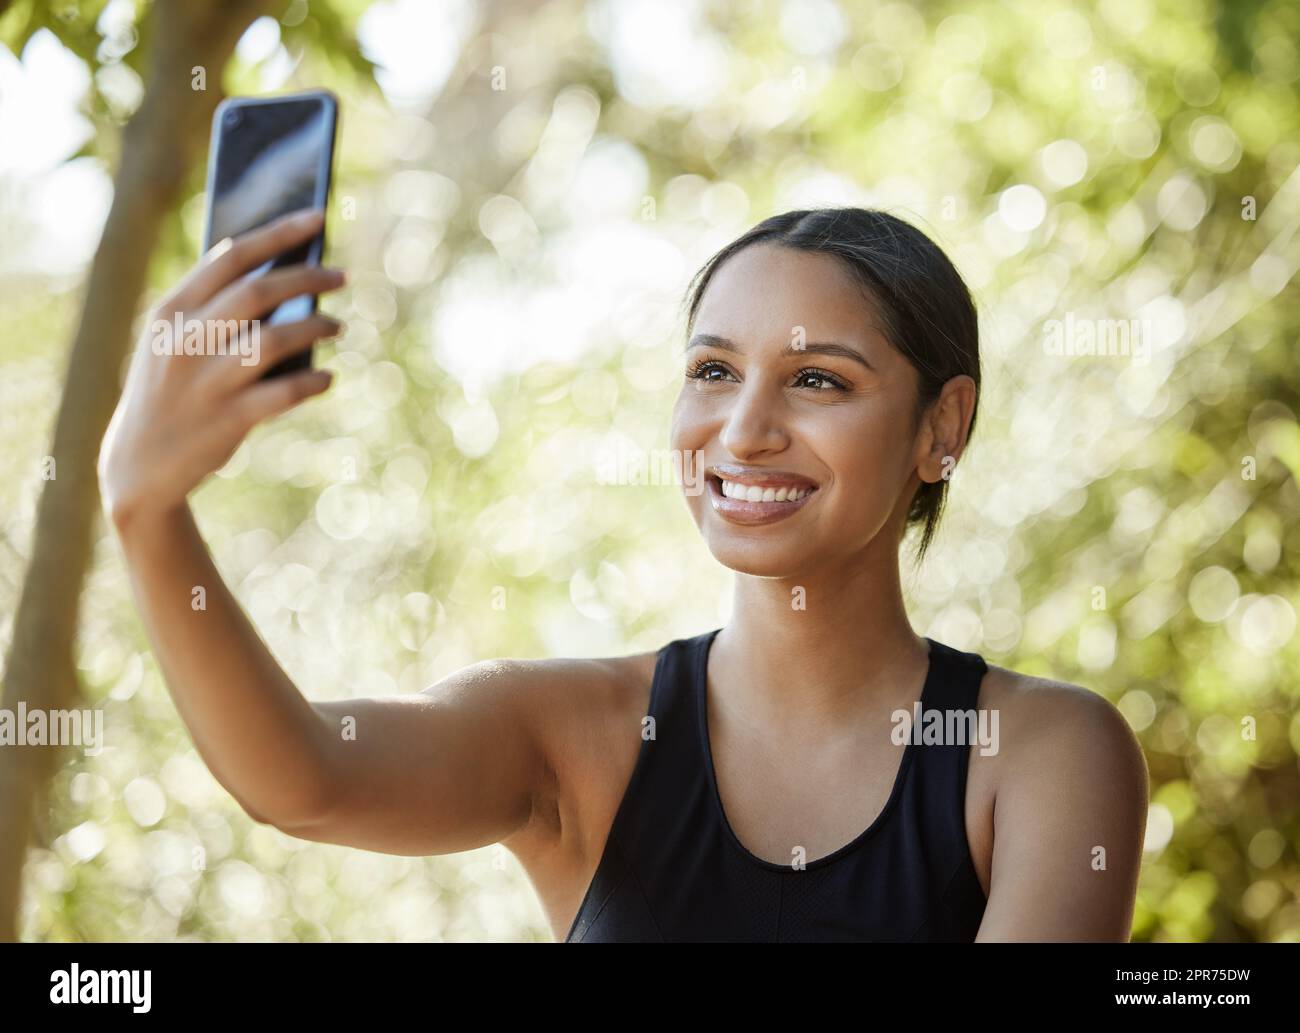 Mid workout selfies. Cropped shot of an attractive young female athlete taking selfies while exercising outdoors. Stock Photo